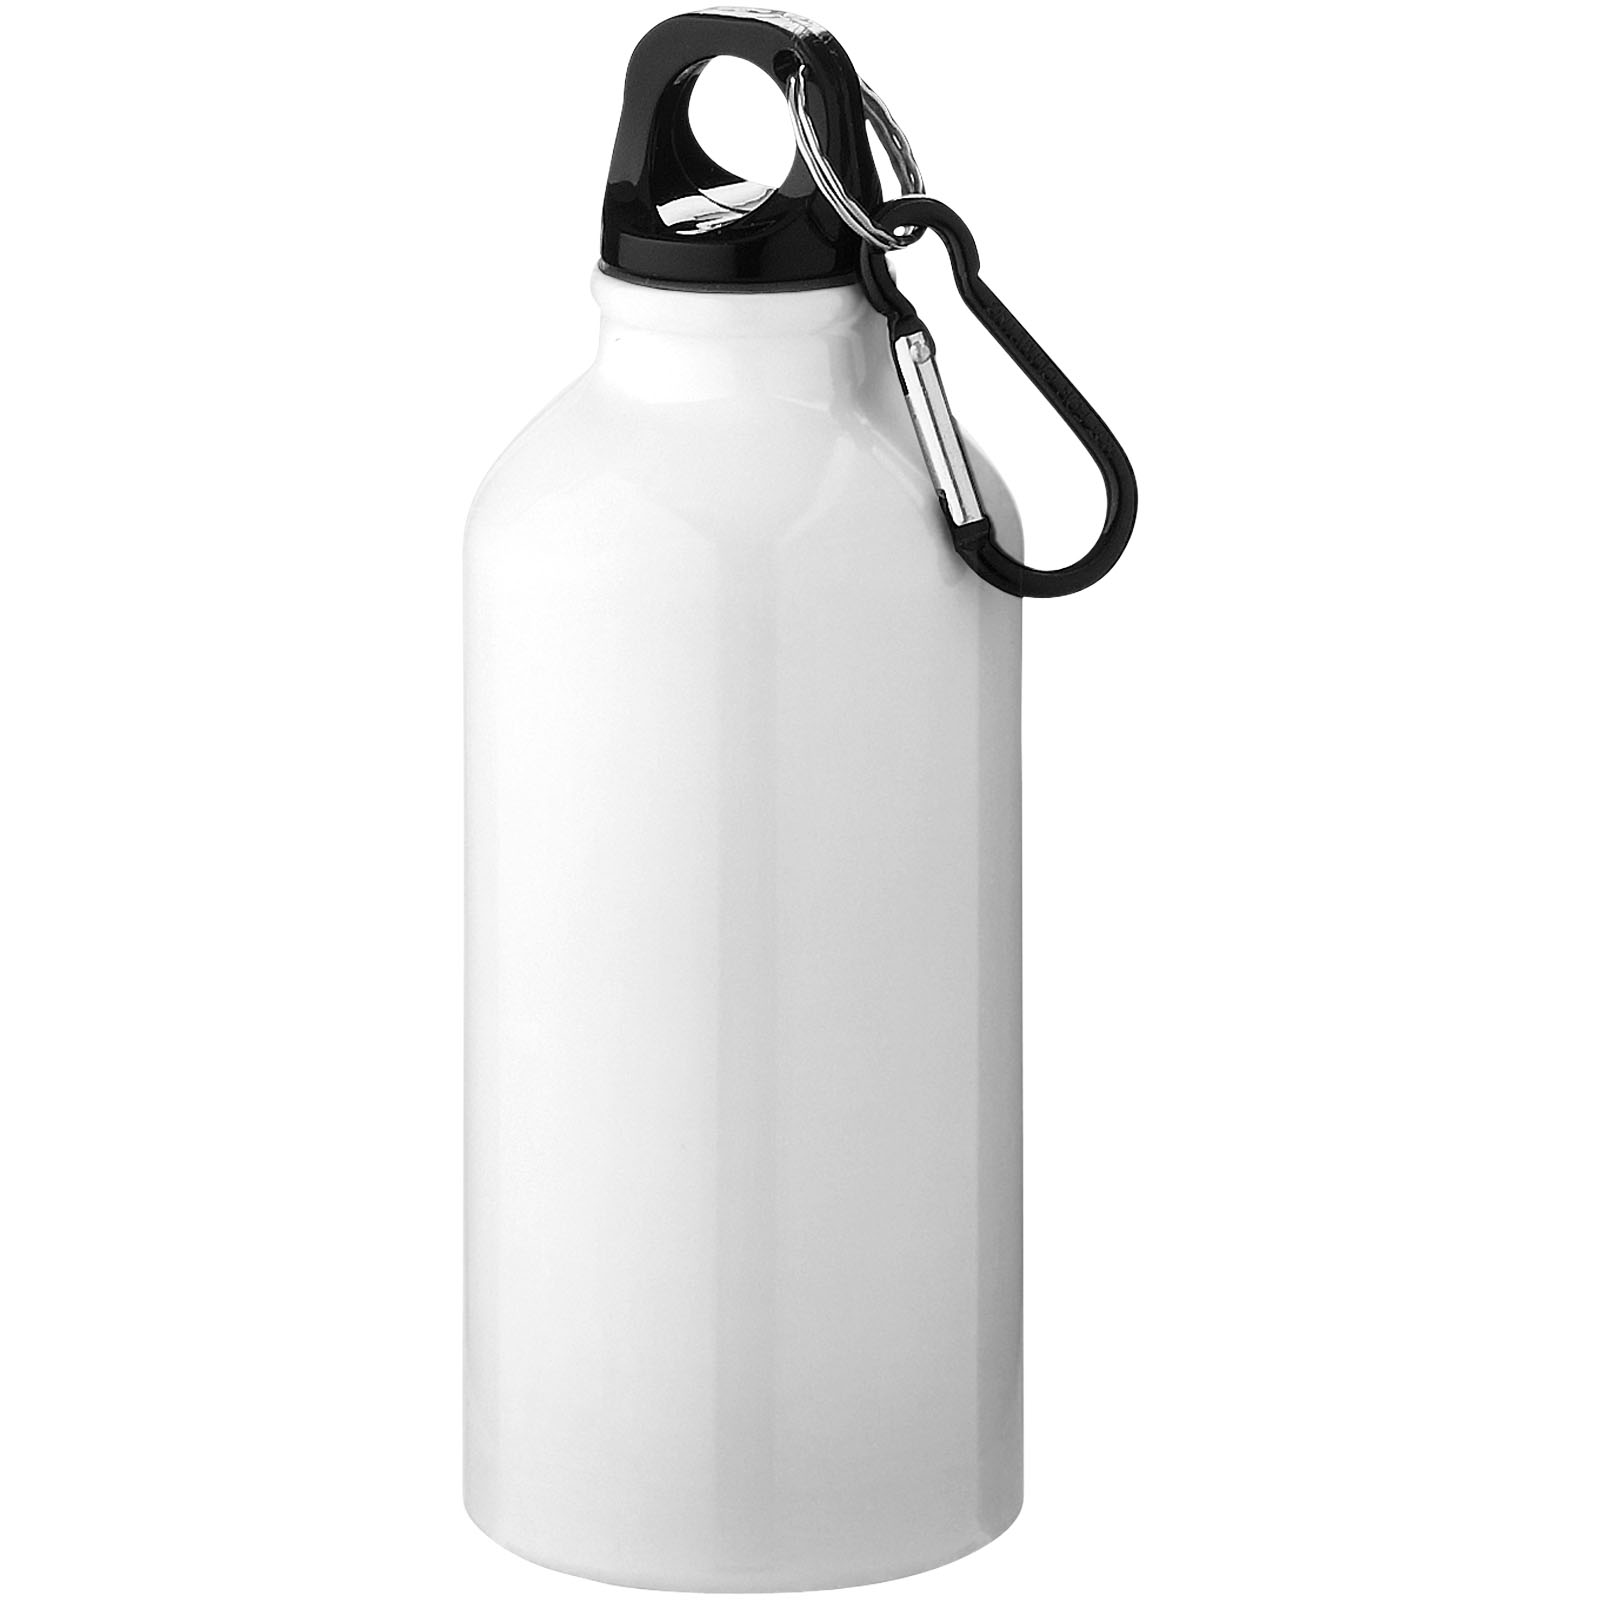 Advertising Water bottles - Oregon 400 ml RCS certified recycled aluminium water bottle with carabiner